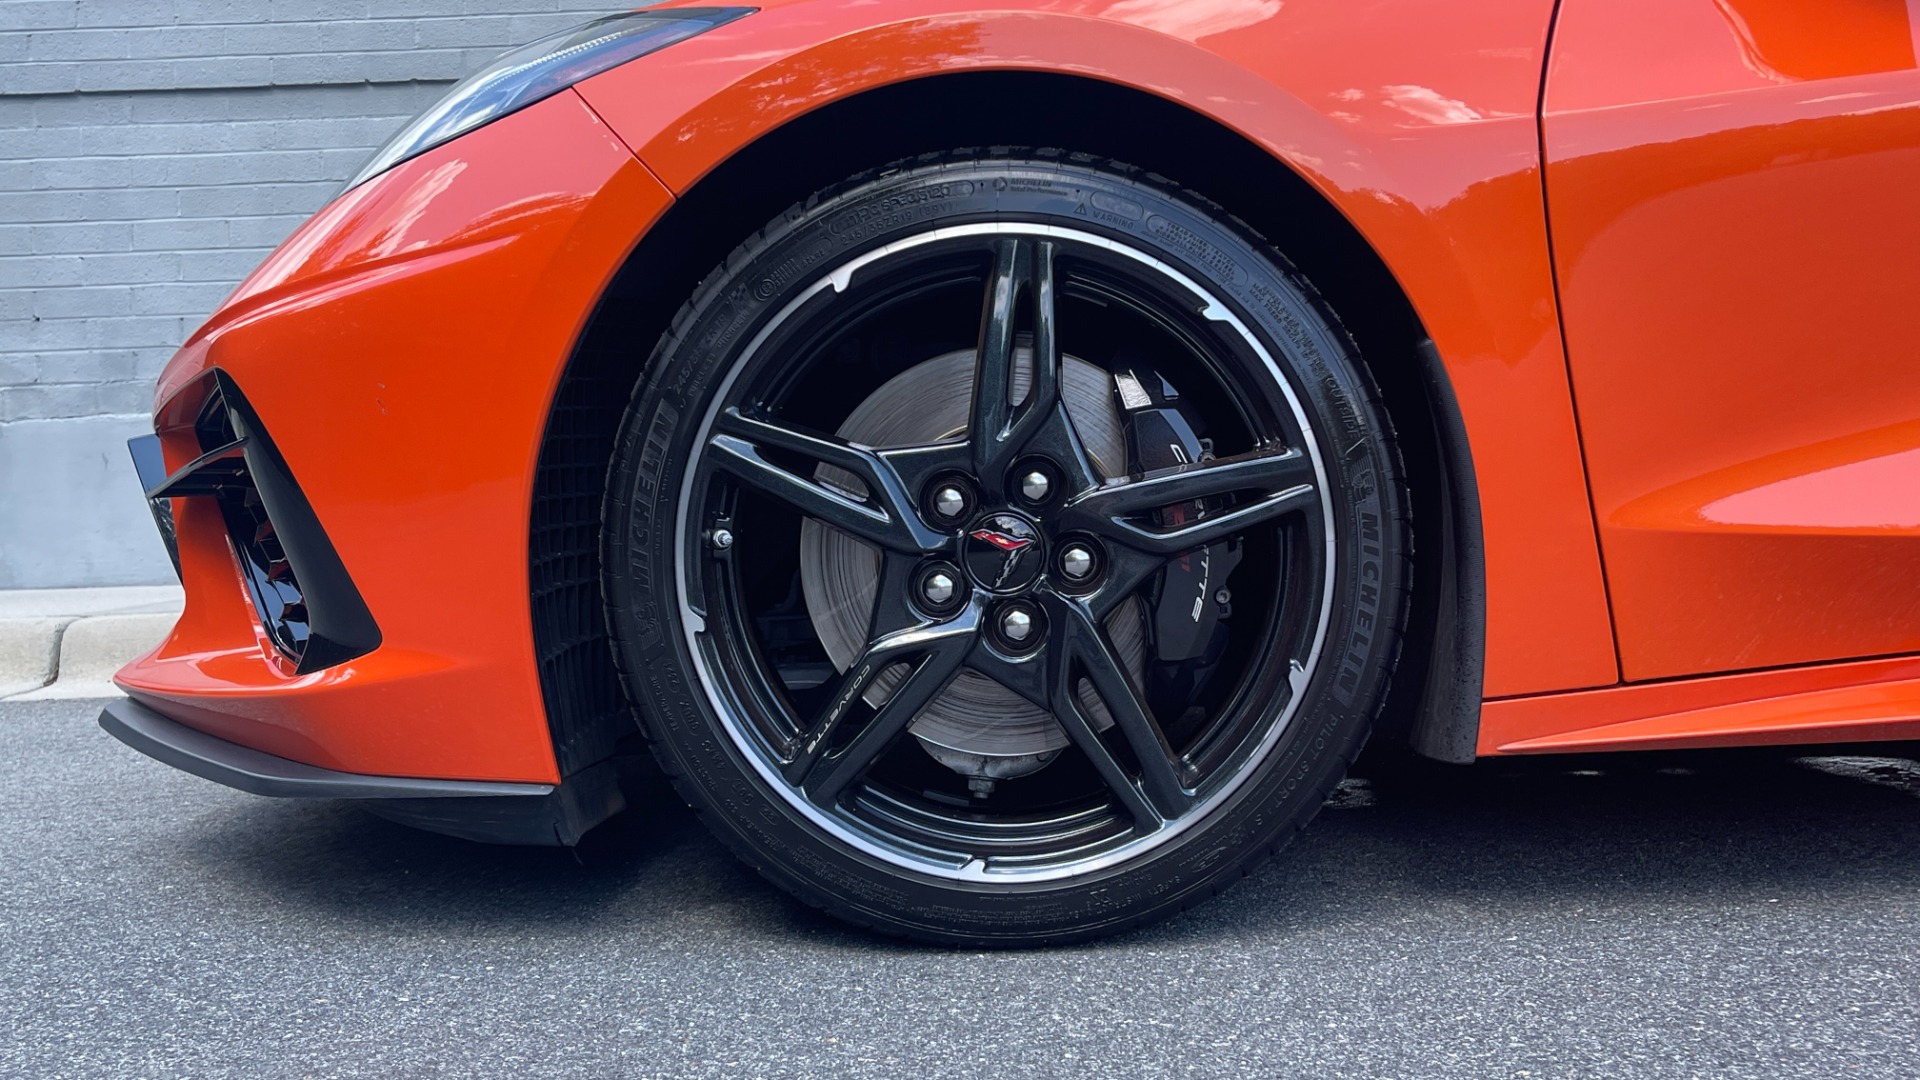 Used 2020 Chevrolet Corvette 3LT / Z51 / PERFORMANCE EXHAUST / FRONT LIFT / Z51 BRAKES / CARBON FIBER AC for sale $92,595 at Formula Imports in Charlotte NC 28227 19